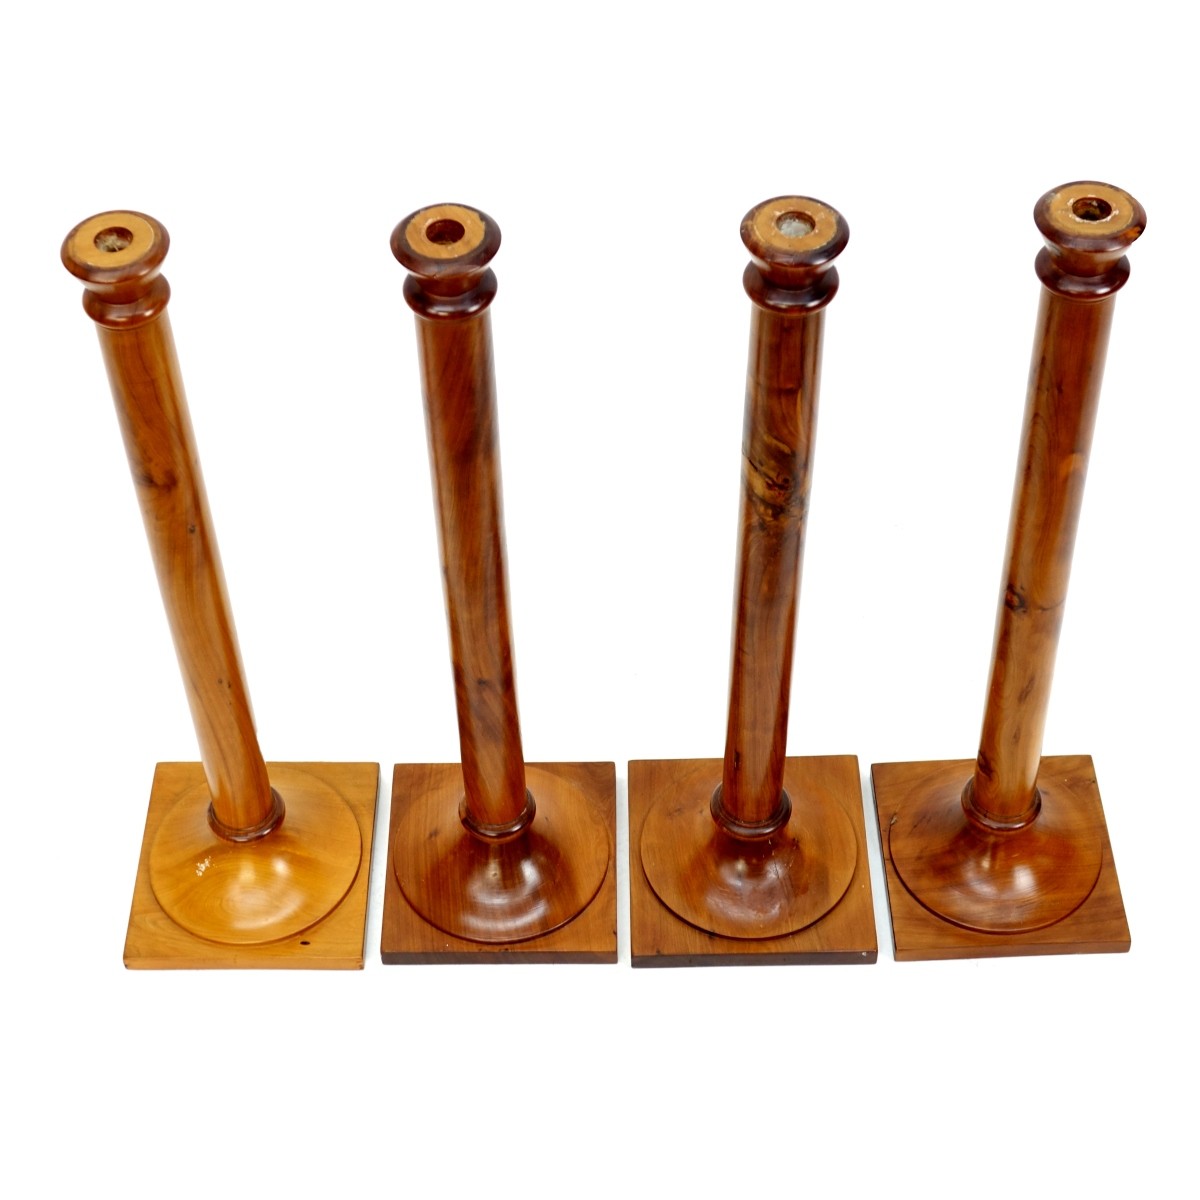 Four (4) Tall Vintage Wooden Candlesticks